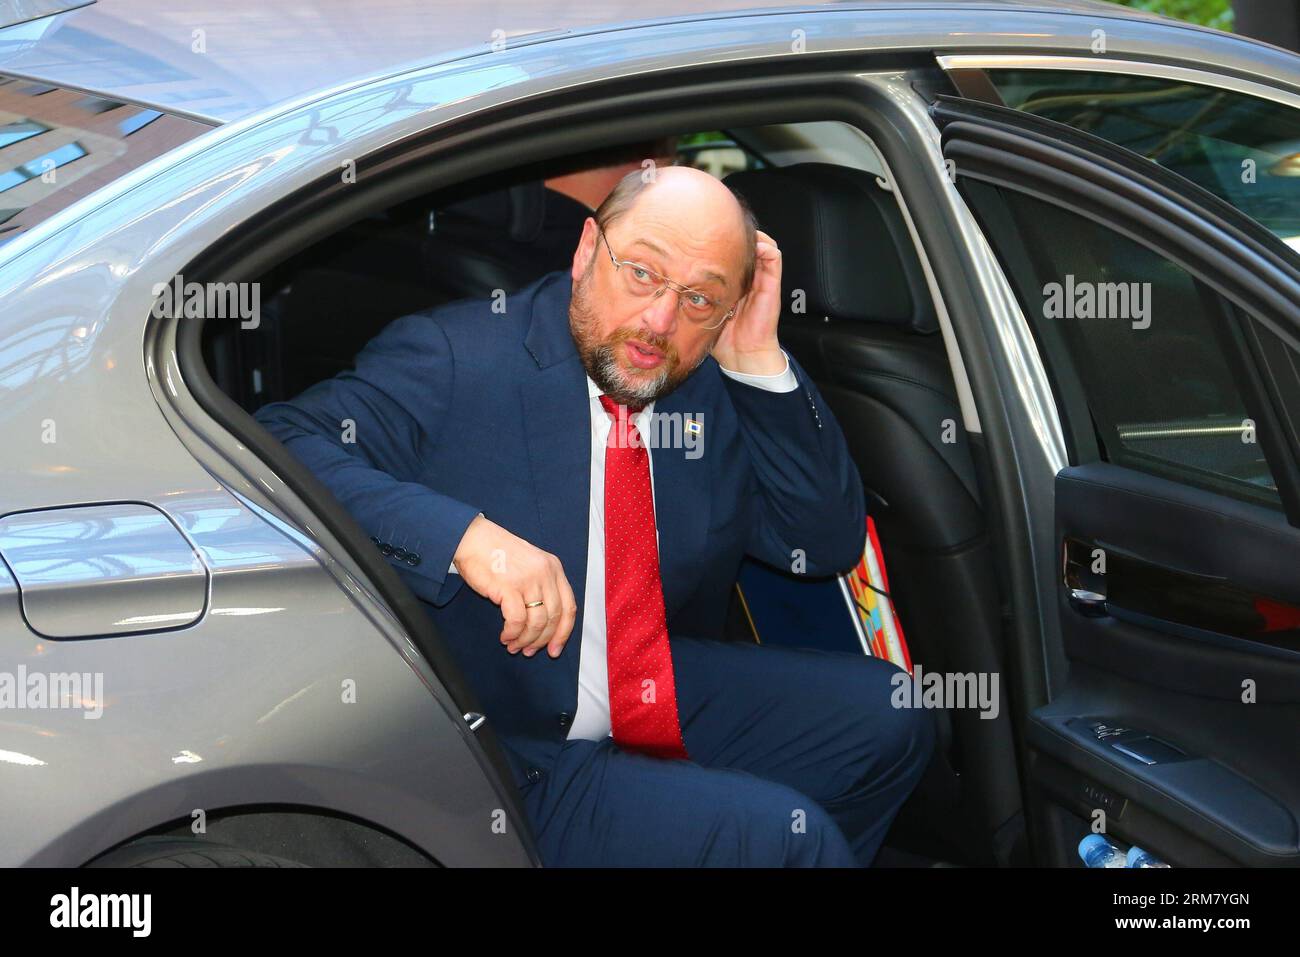 (140320) -- BRUSSELS, March 20, 2014 (Xinhua) -- President of European Parliament Martin Schulz arrives to attend the European Union (EU) Summit at the EU headquarters in Brussels, capital of Belgium, March 20, 2014. The EU spring summit will focus on industrial competitiveness, Ukraine and the bloc s energy strategy. (Xinhua/Gong Bing)(zl) BELGIUM-BRUSSELS-EU-SUMMIT-UKRAINE PUBLICATIONxNOTxINxCHN   Brussels March 20 2014 XINHUA President of European Parliament Martin Schulz arrives to attend The European Union EU Summit AT The EU Headquarters in Brussels Capital of Belgium March 20 2014 The E Stock Photo